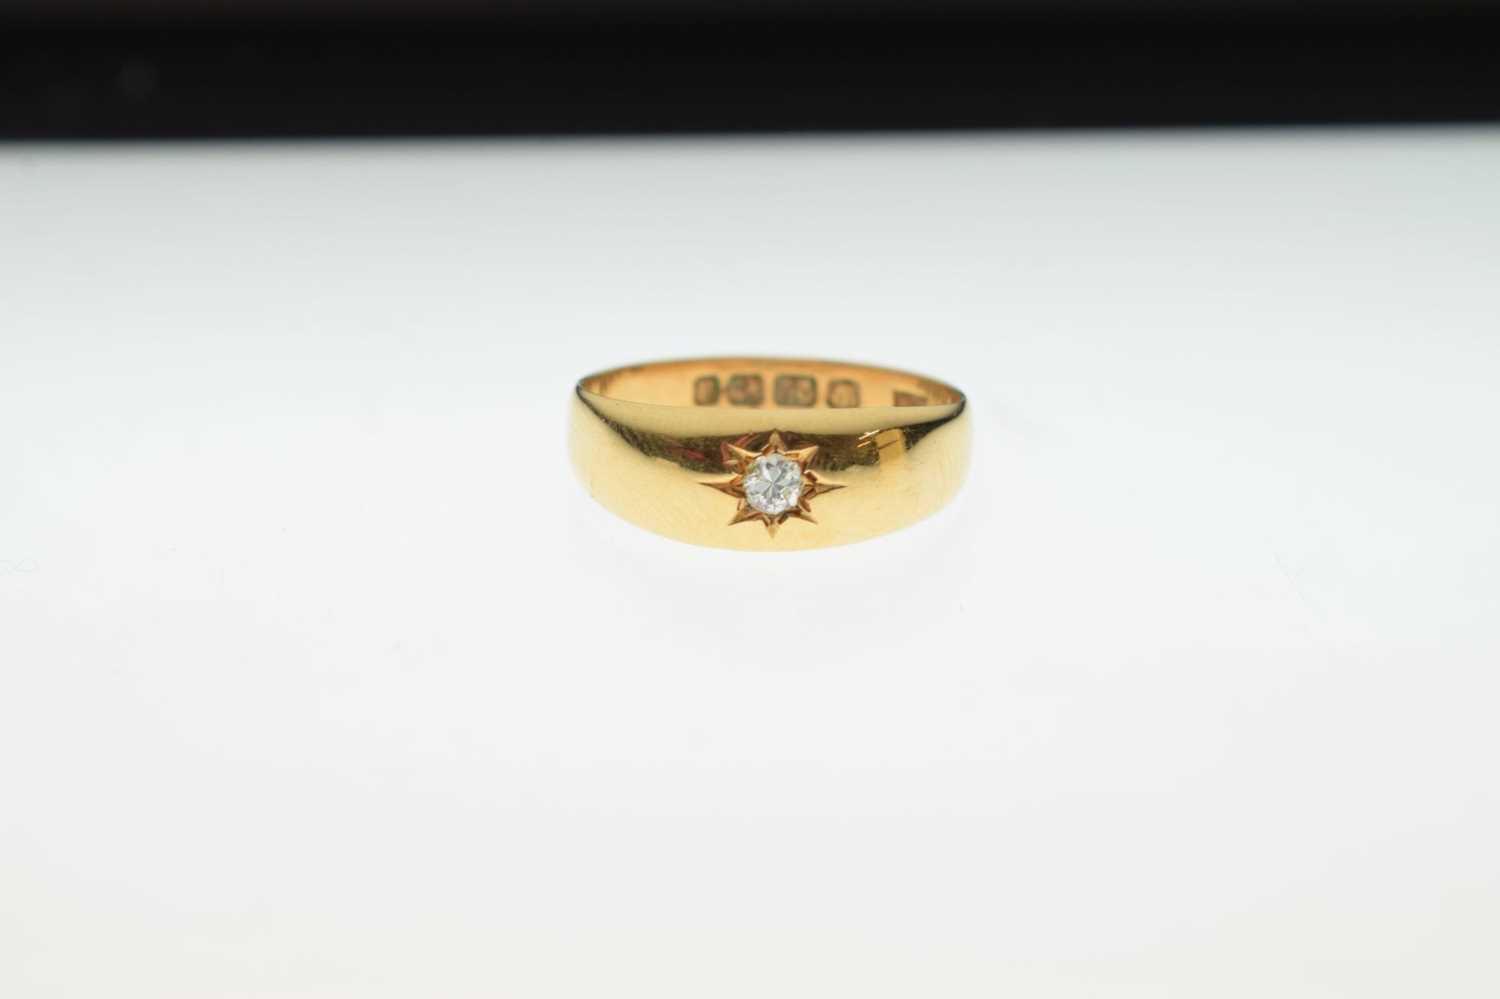 Late Victorian 22ct gold gypsy set diamond ring - Image 2 of 7